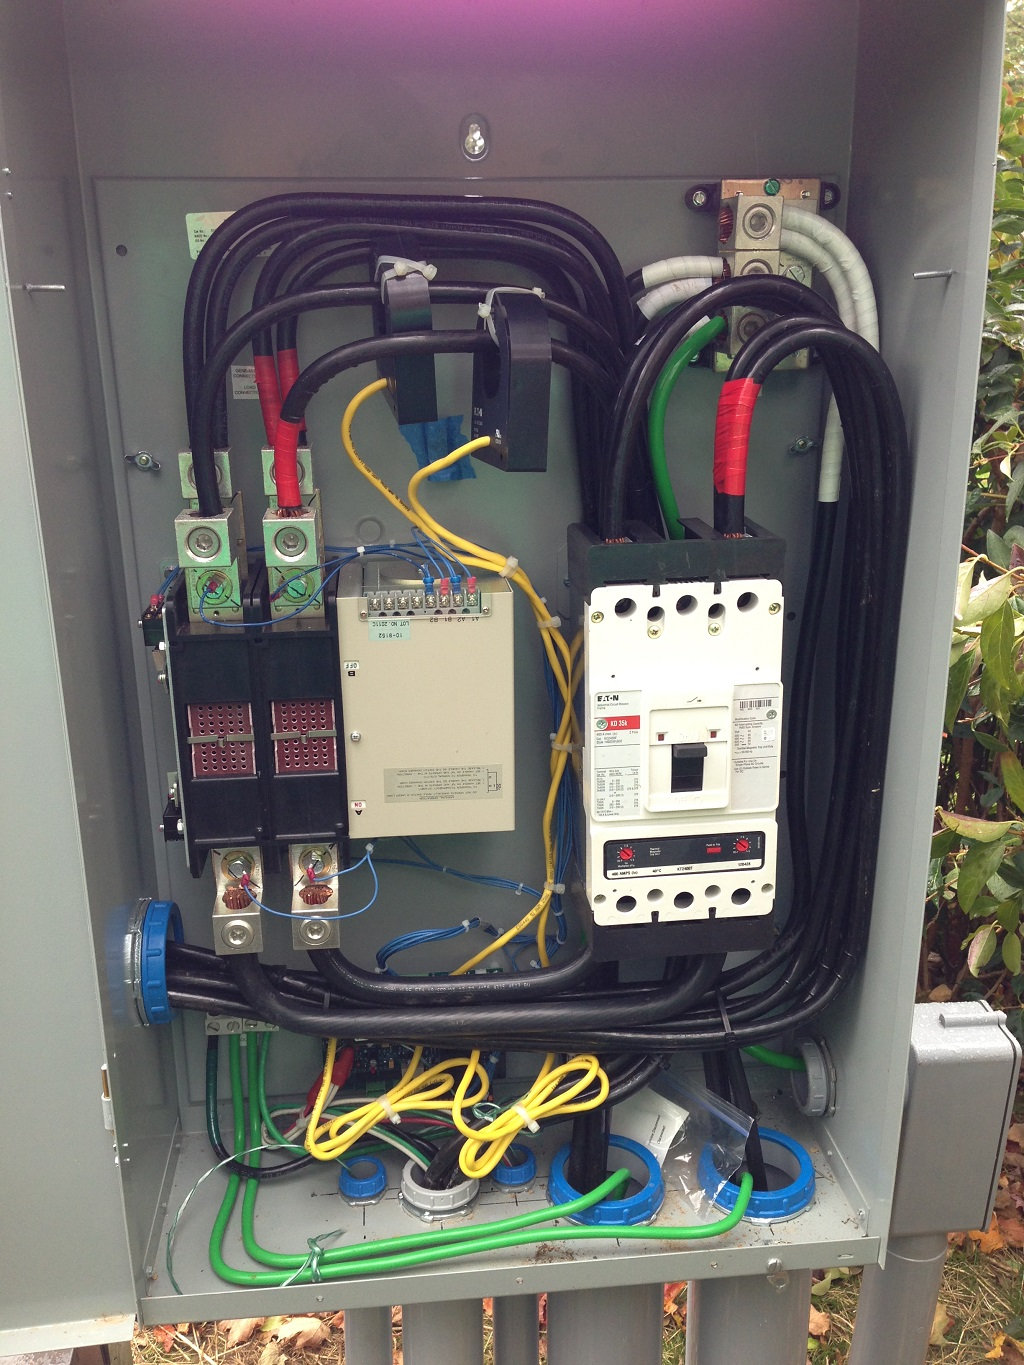 wiring diagram for transfer switch into 400a service